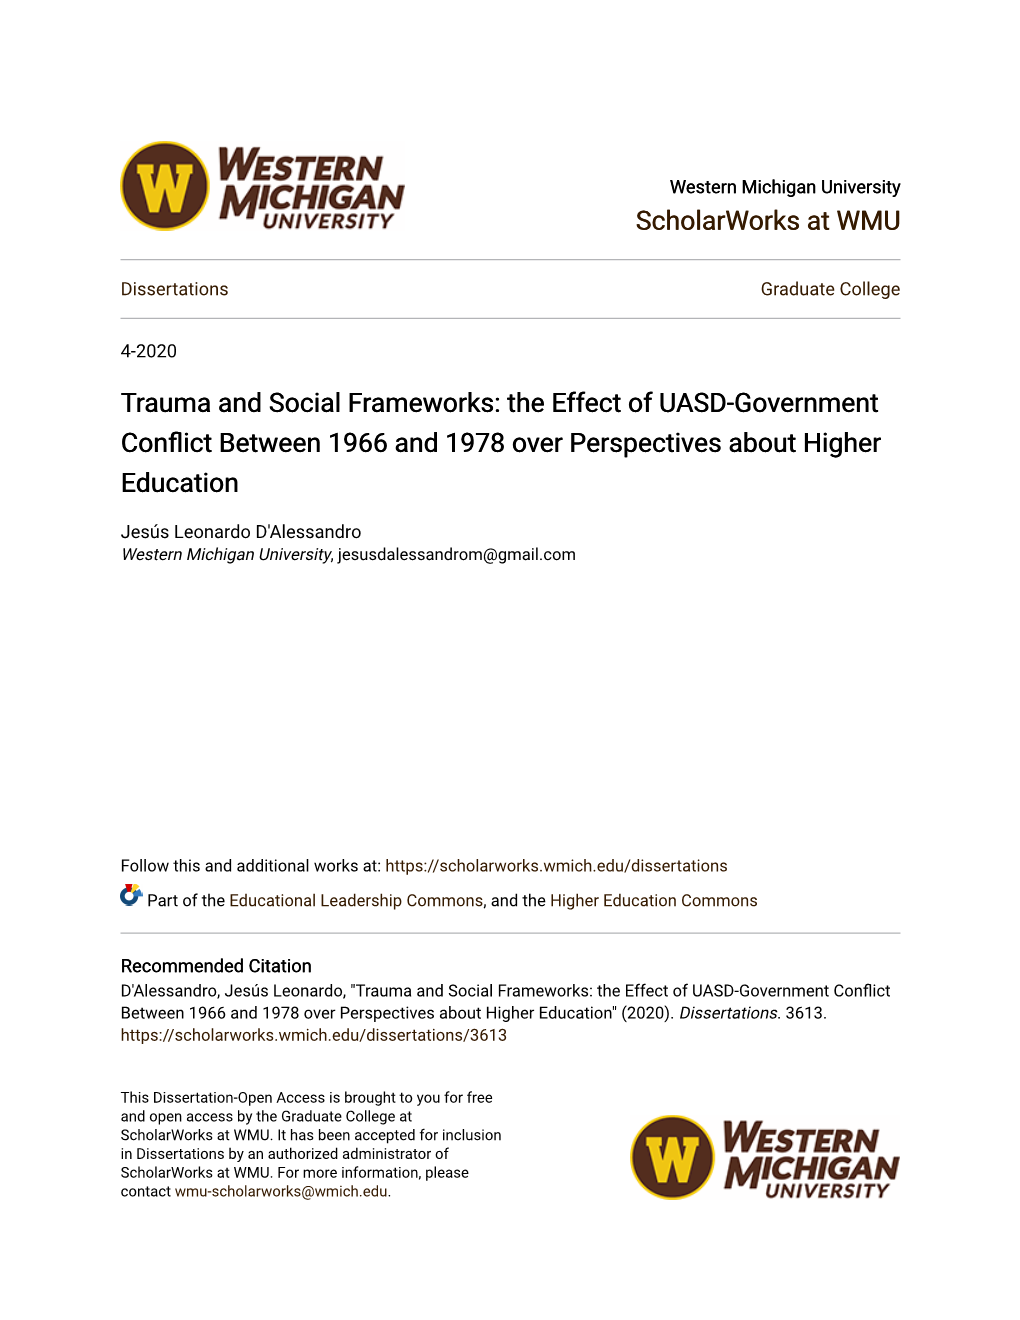 The Effect of UASD-Government Conflict Between 1966 and 1978 Vo Er Perspectives About Higher Education